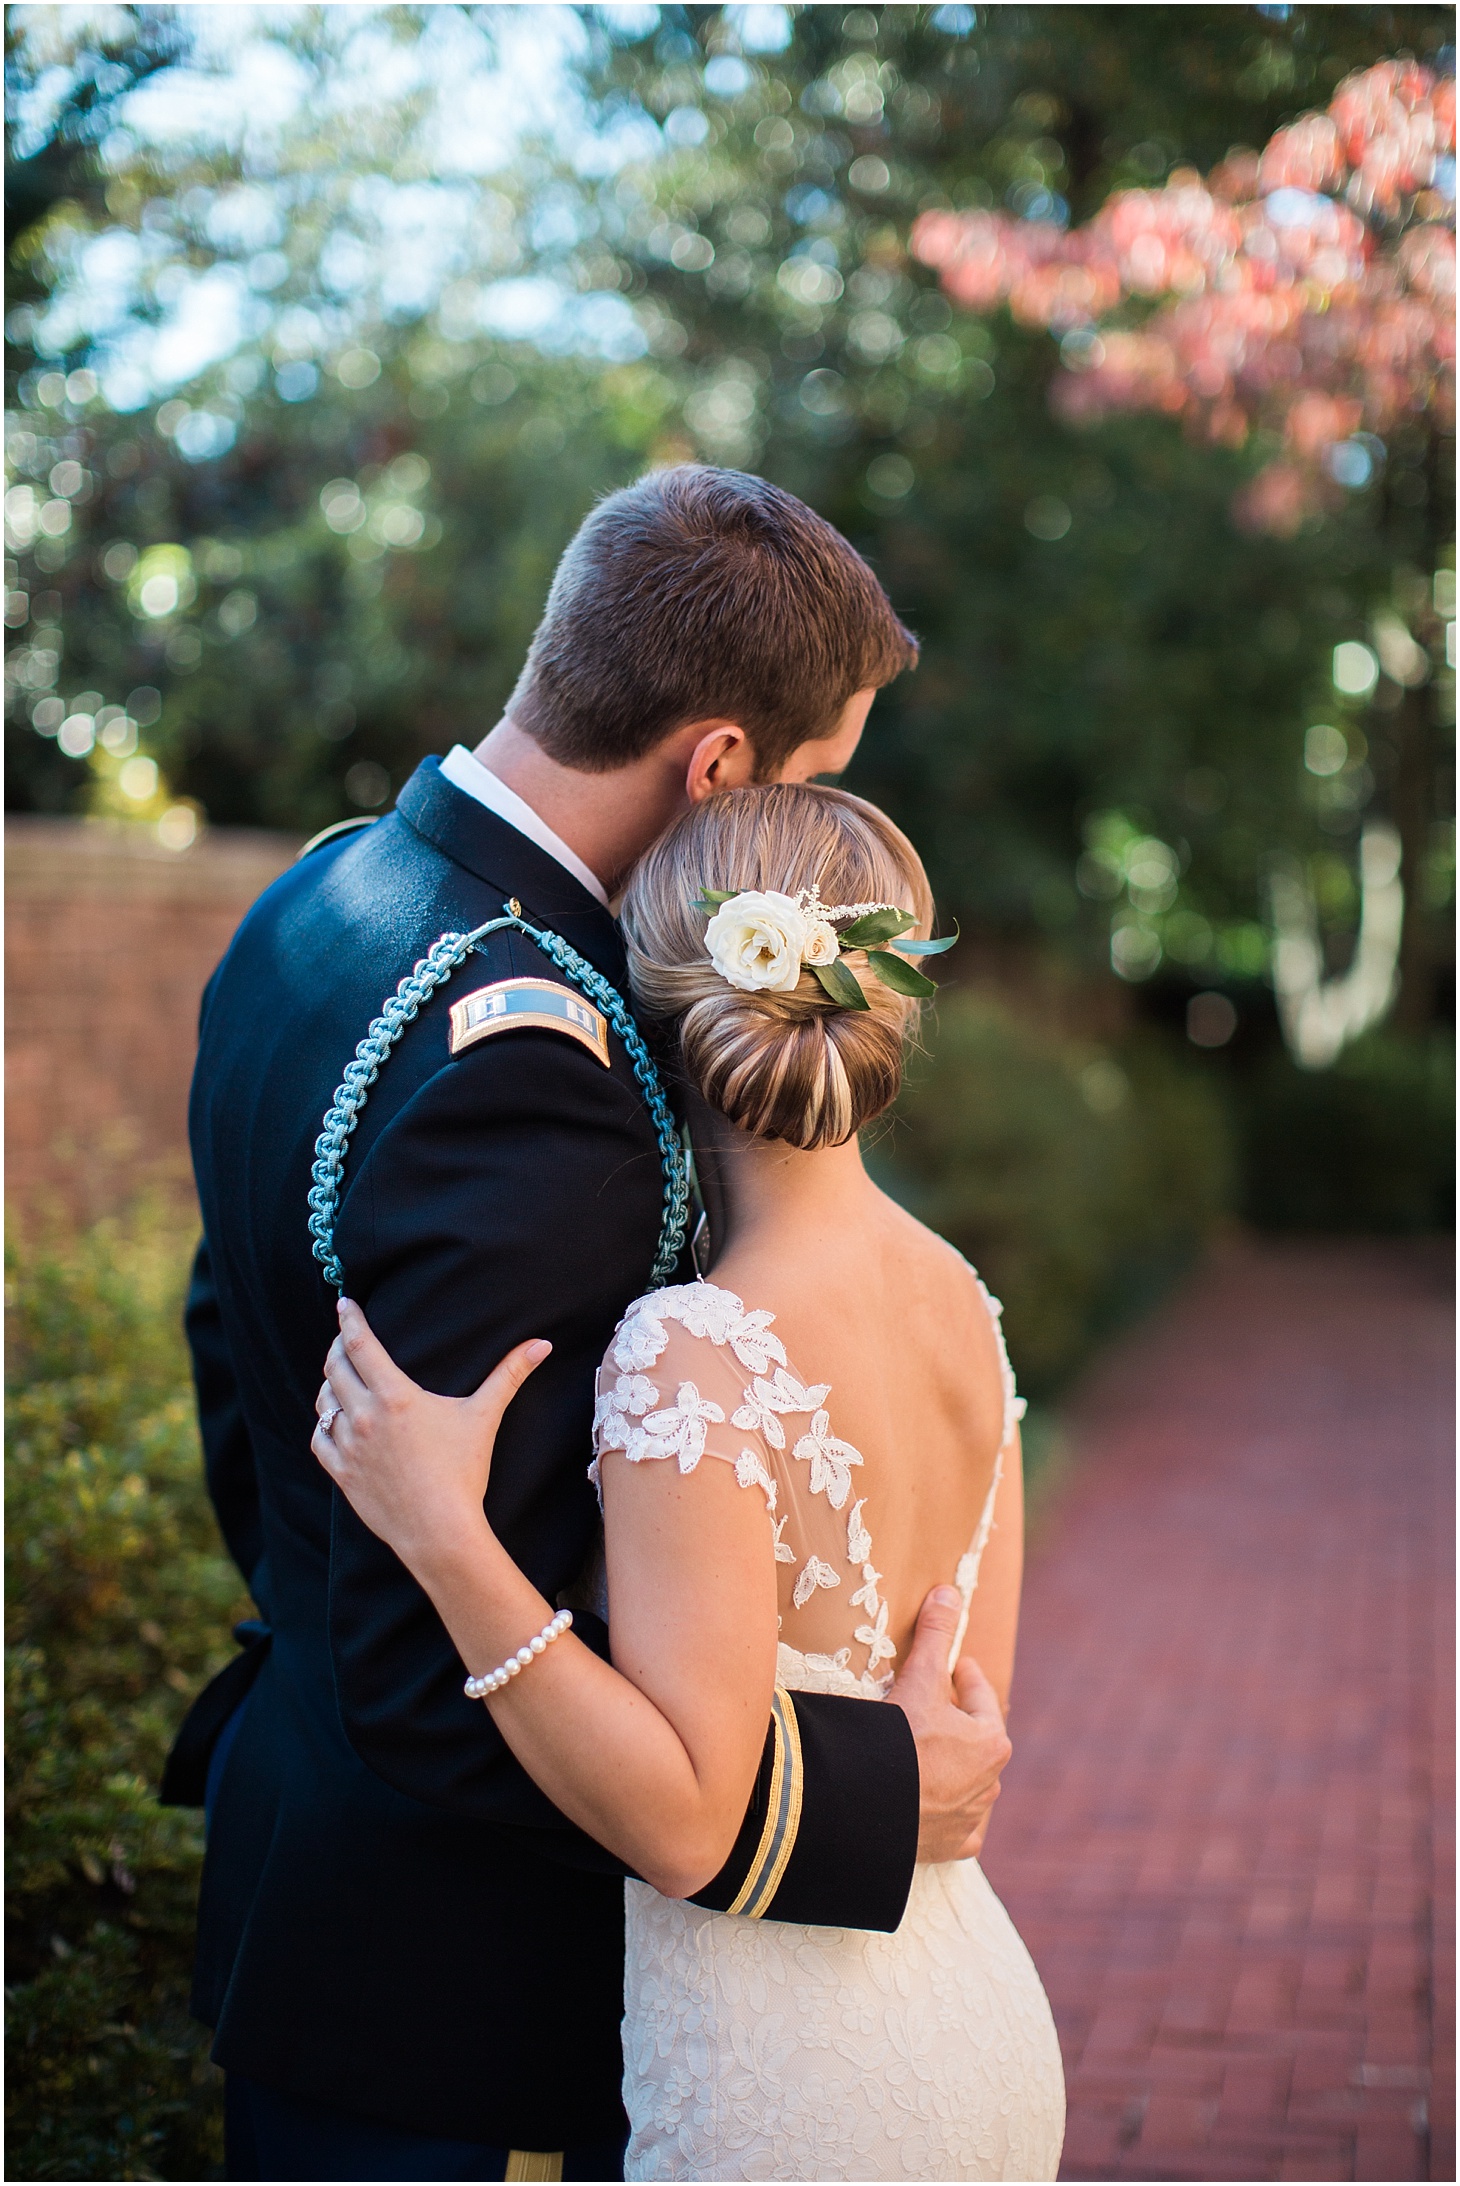 Wedding Portraits at Old Presbyterian Meeting House | Southern Black Tie wedding at St. Regis DC in Dusty Blue and Ivory | Sarah Bradshaw Photography